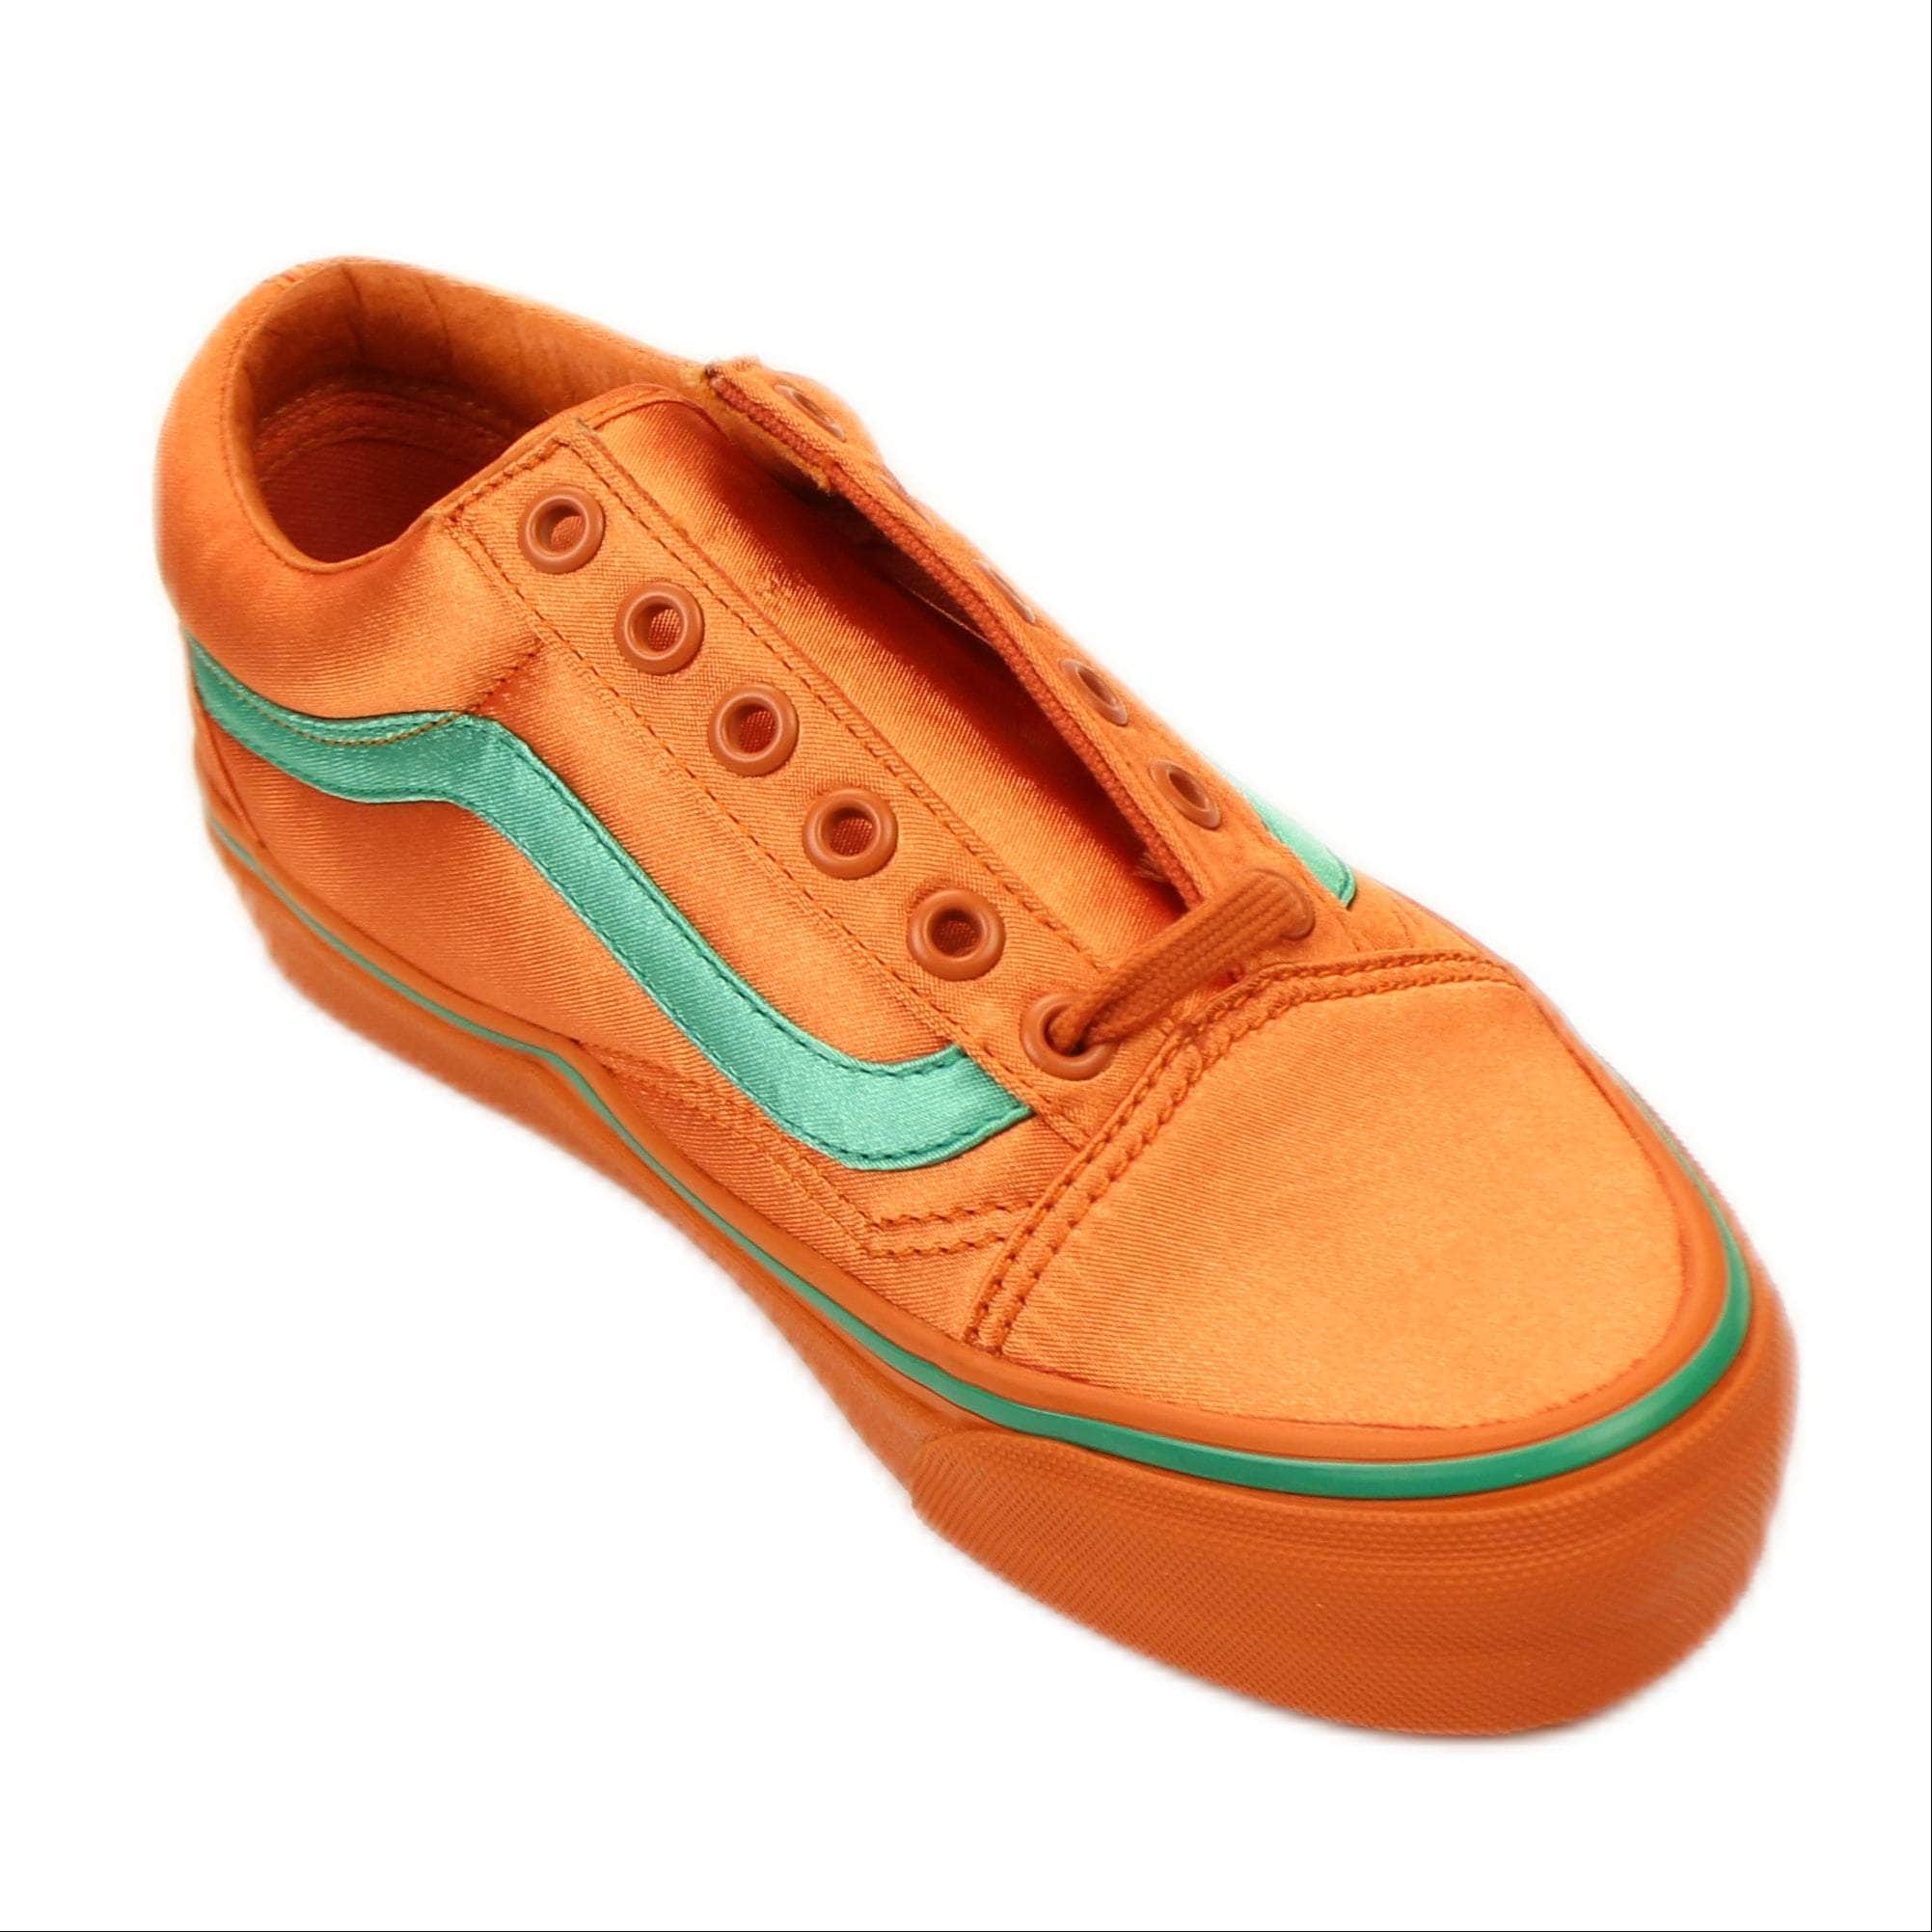 Vans x Opening Ceremony channelenable-all, chicmi, couponcollection, main-shoes, shop375, size-4, under-250, unisex-sneakers 4 ORANGE/GREEN OC SATIN OLD SKOOL SNEAKERS 95-VOC-2002/4 95-VOC-2002/4